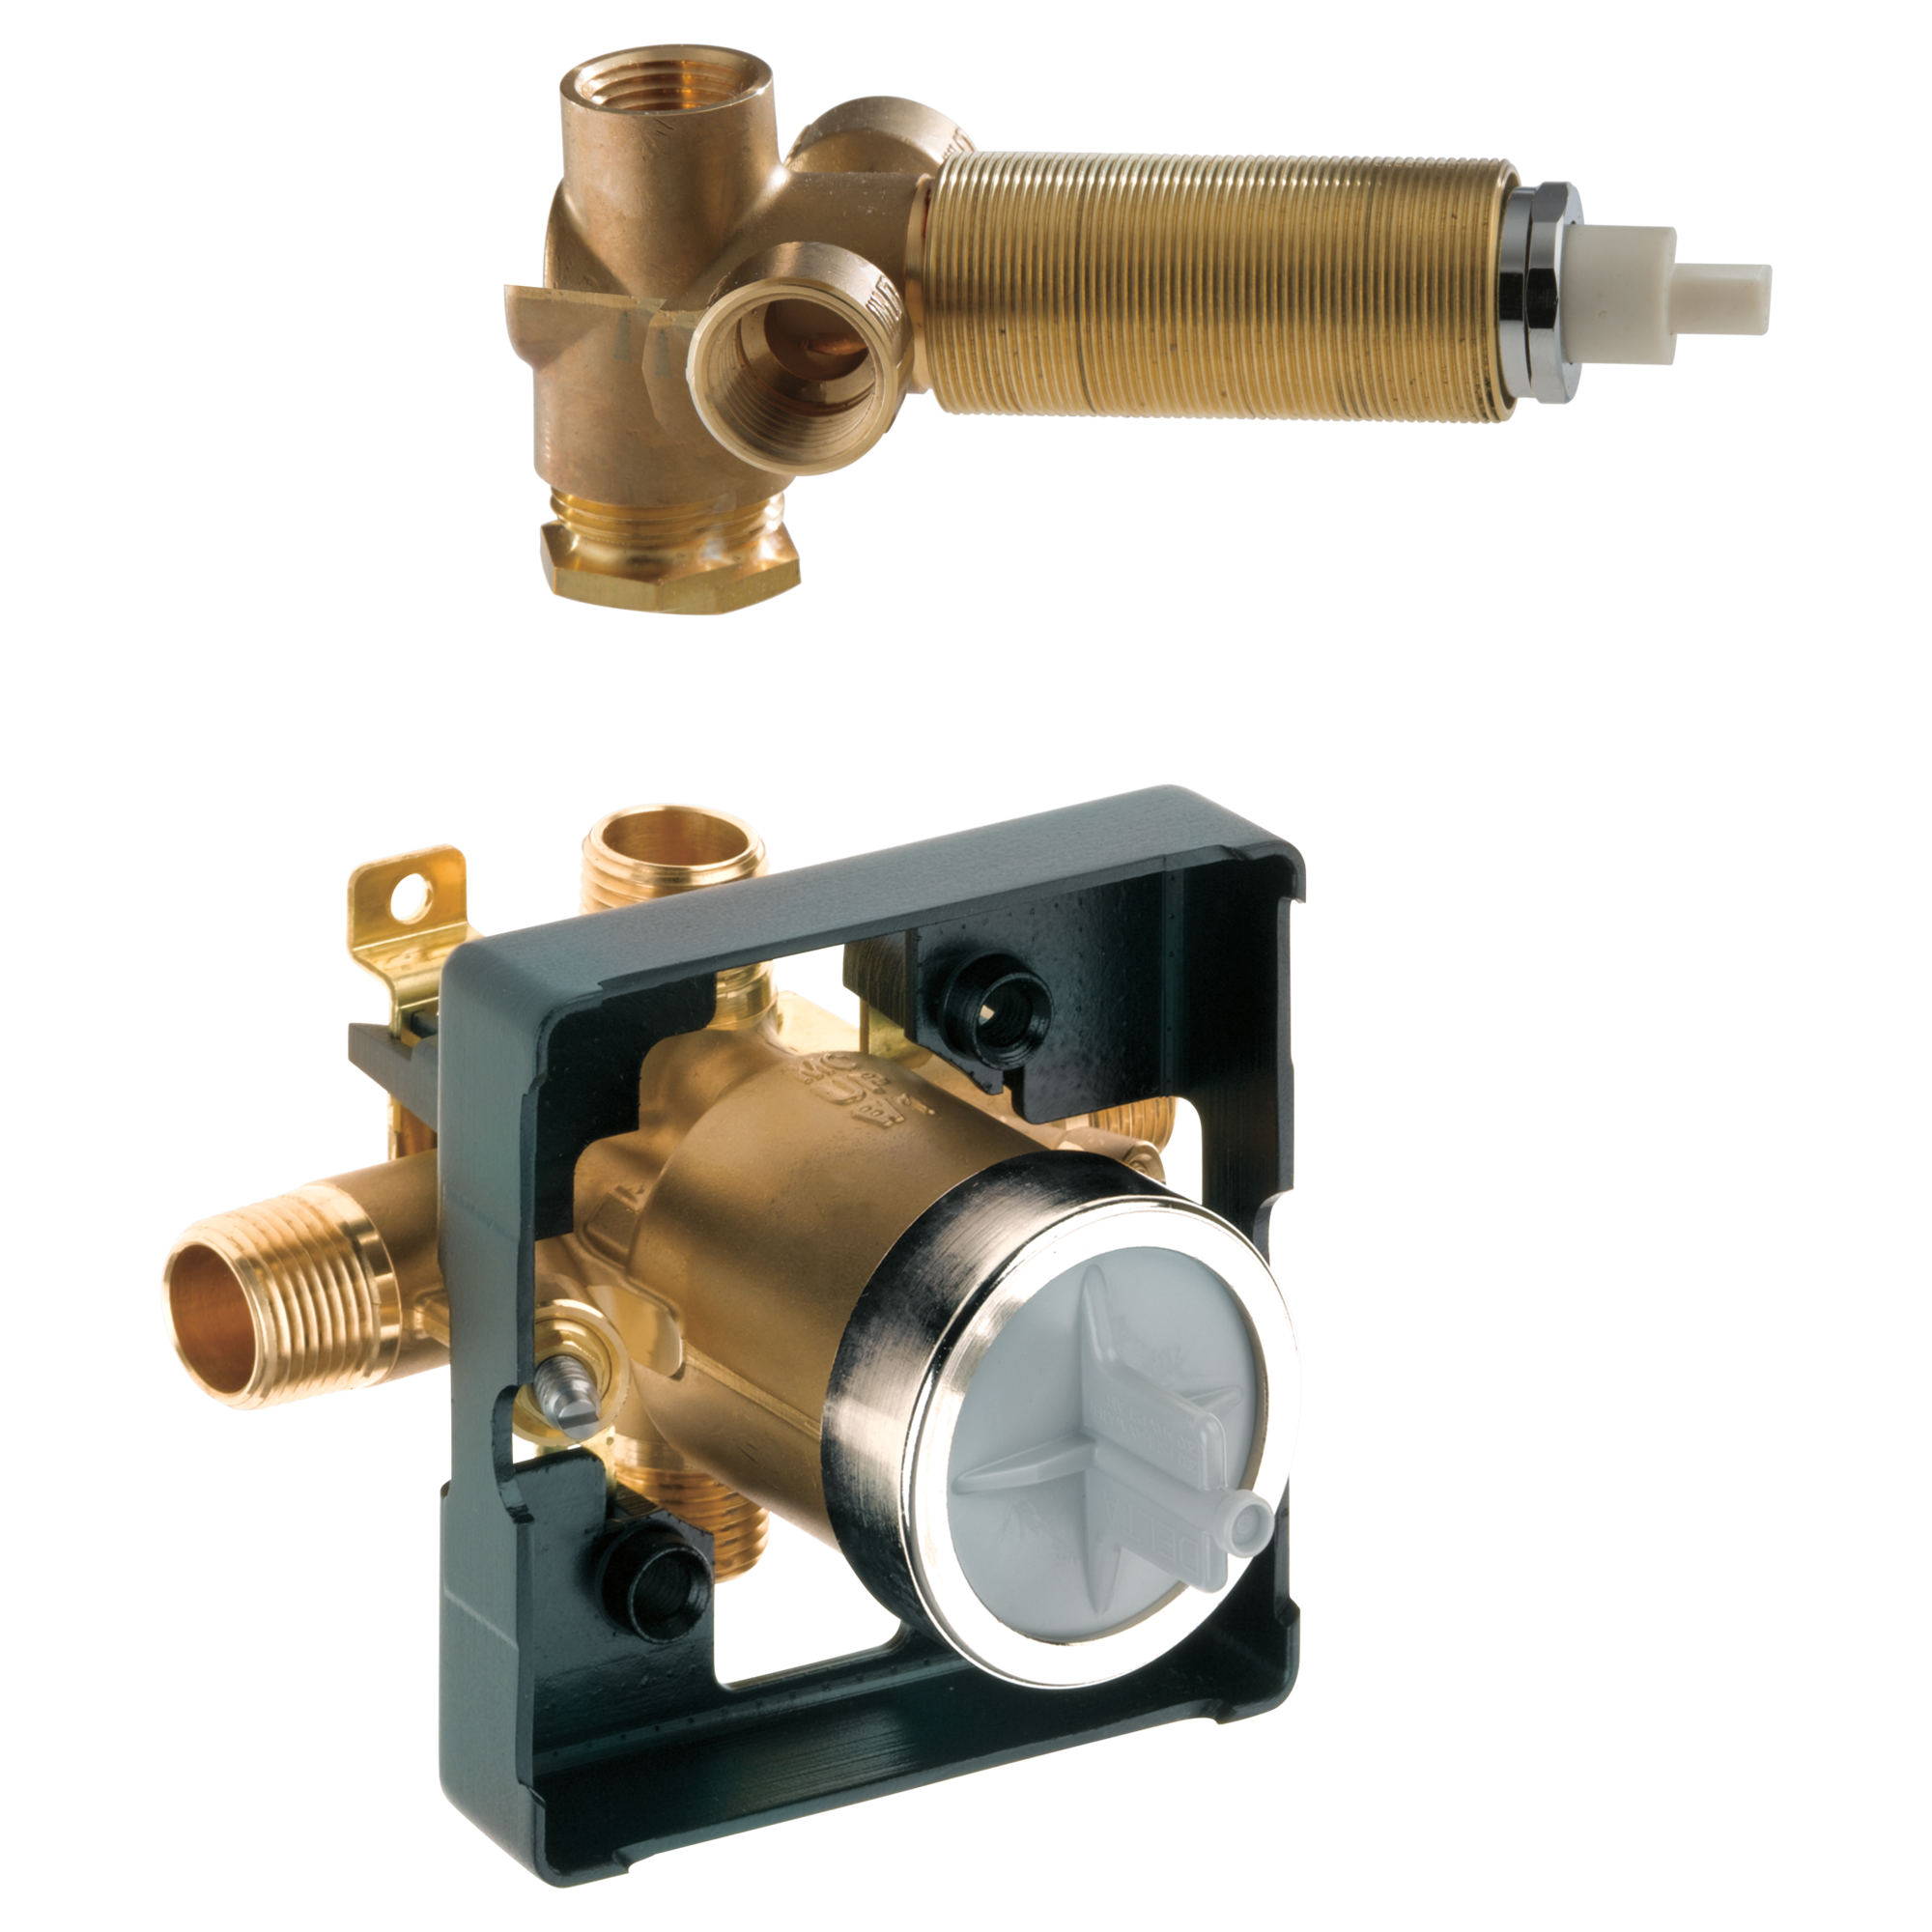 Delta R10700-UNWS Multichoice Universal Valve Body with In - Wall Diverter Valve